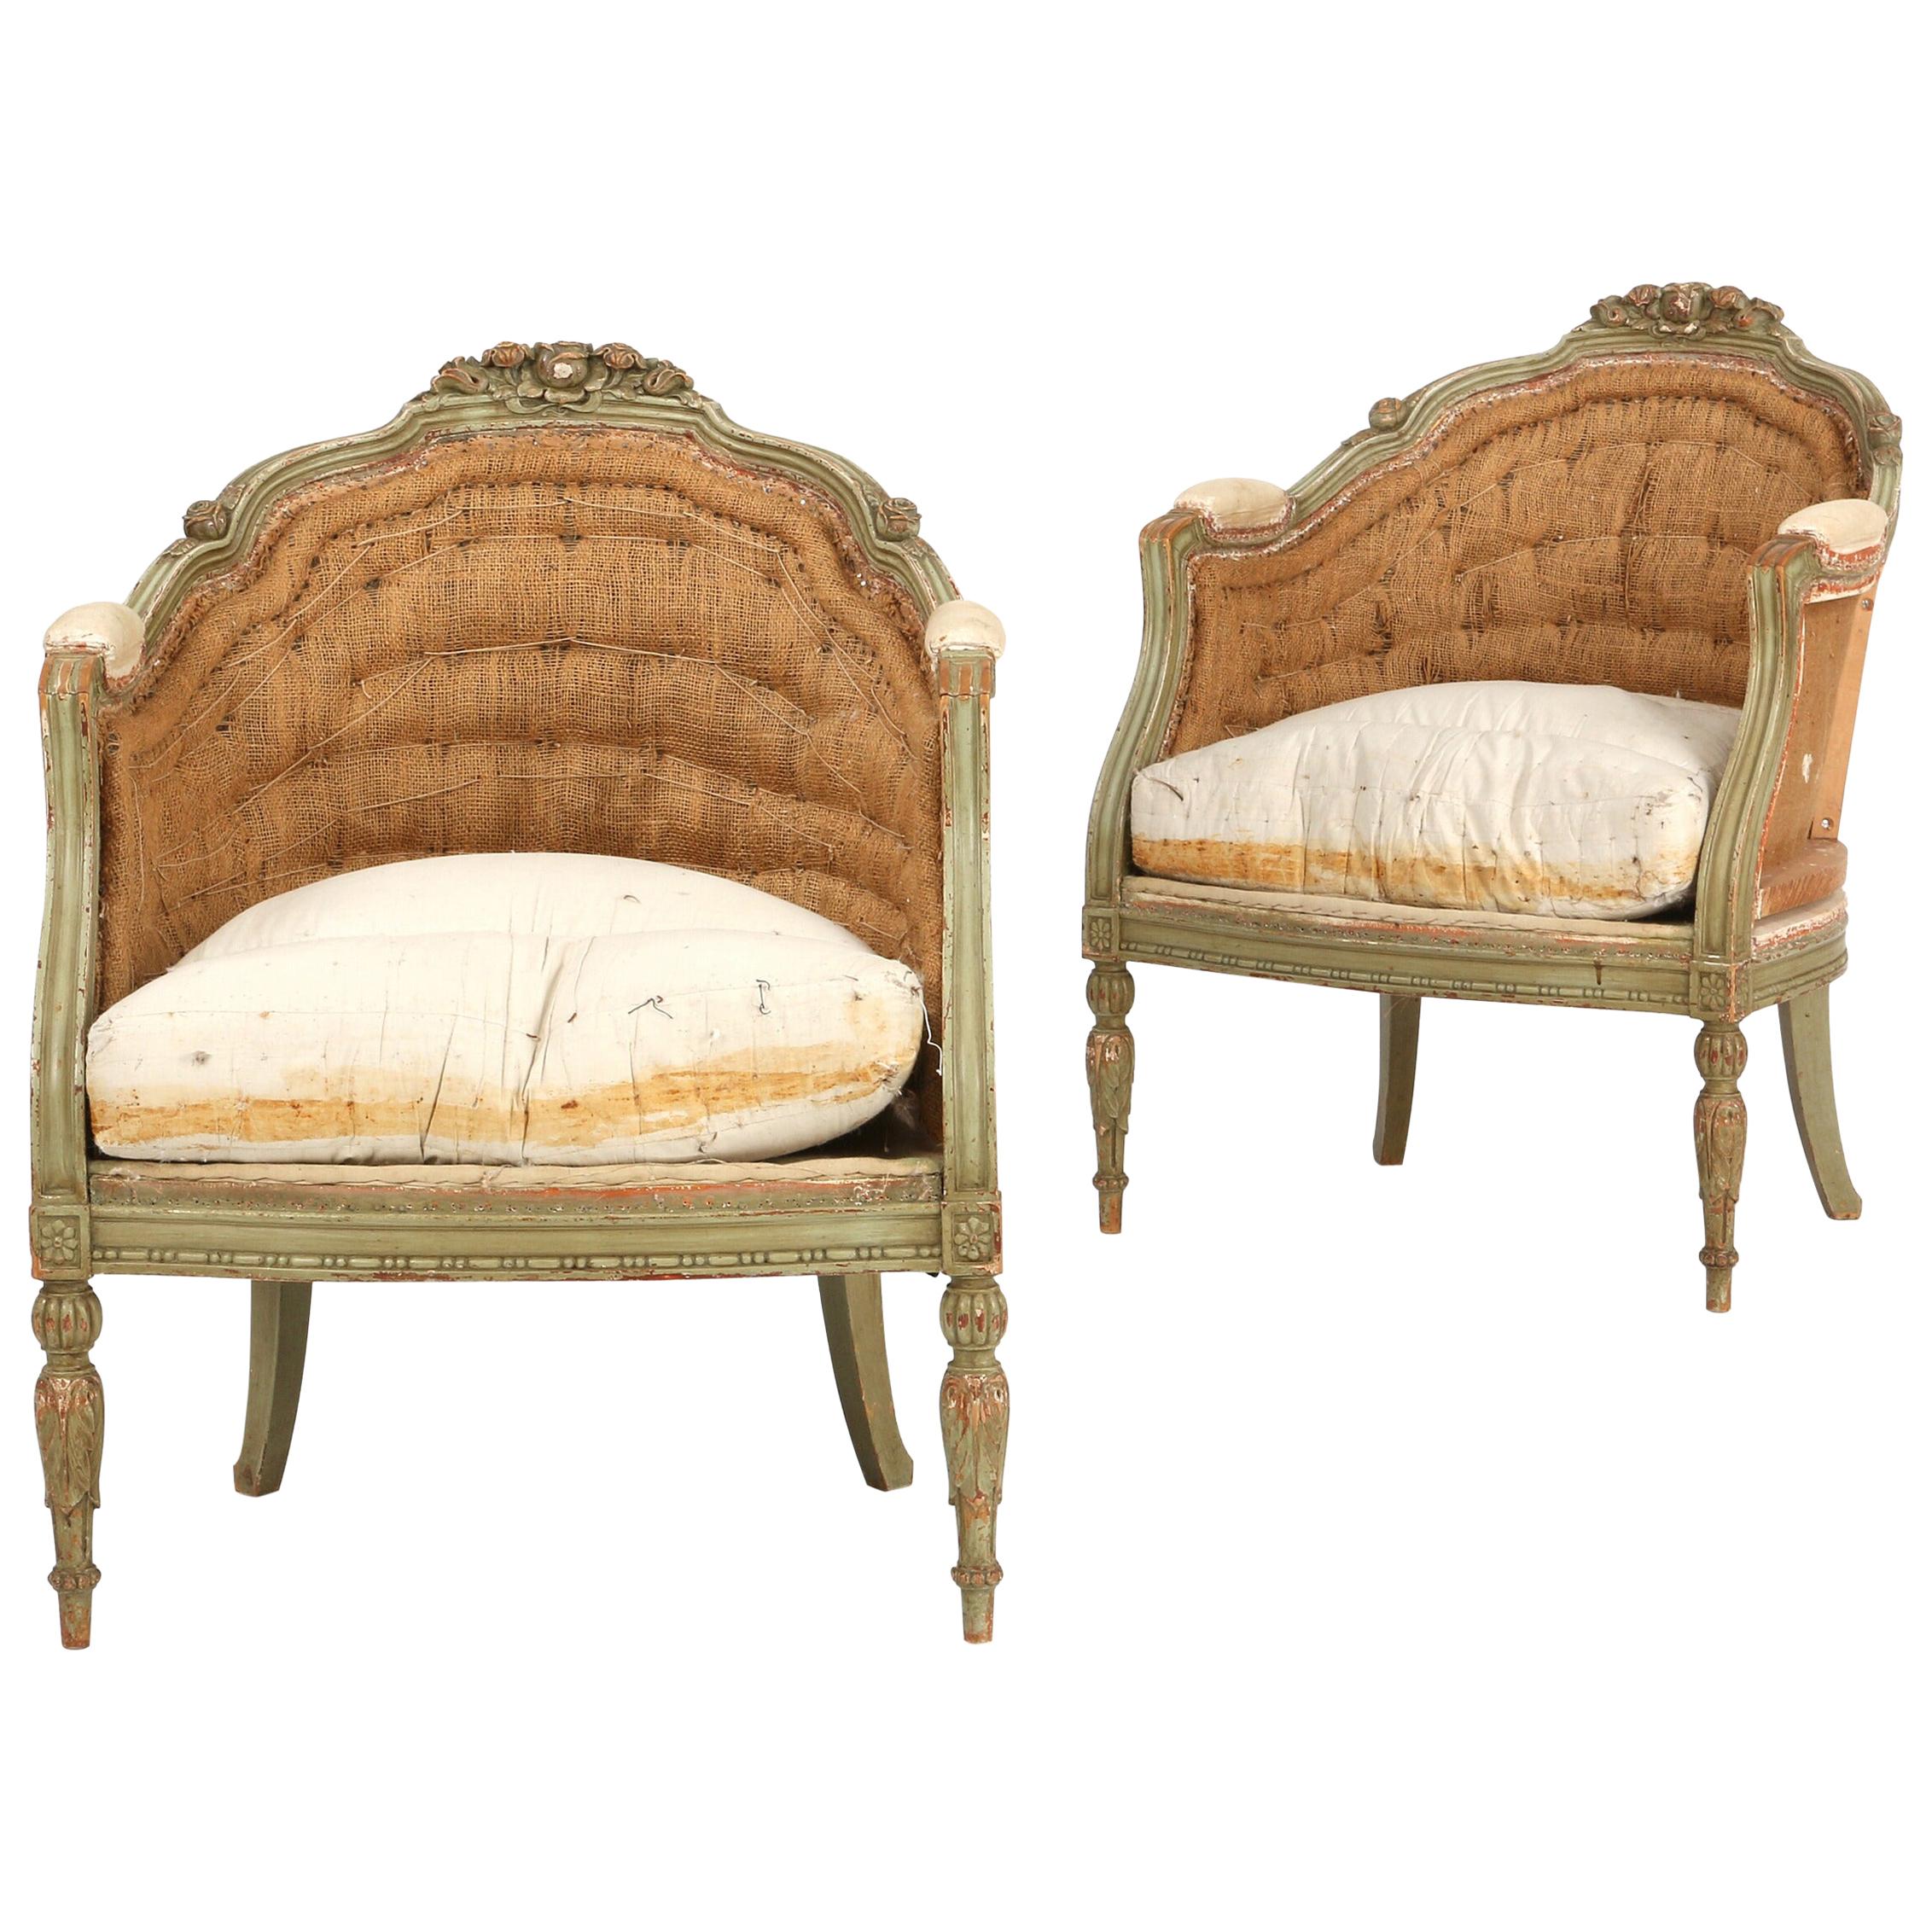 Pair of Painted Gustavian Style Armchairs, Sweden